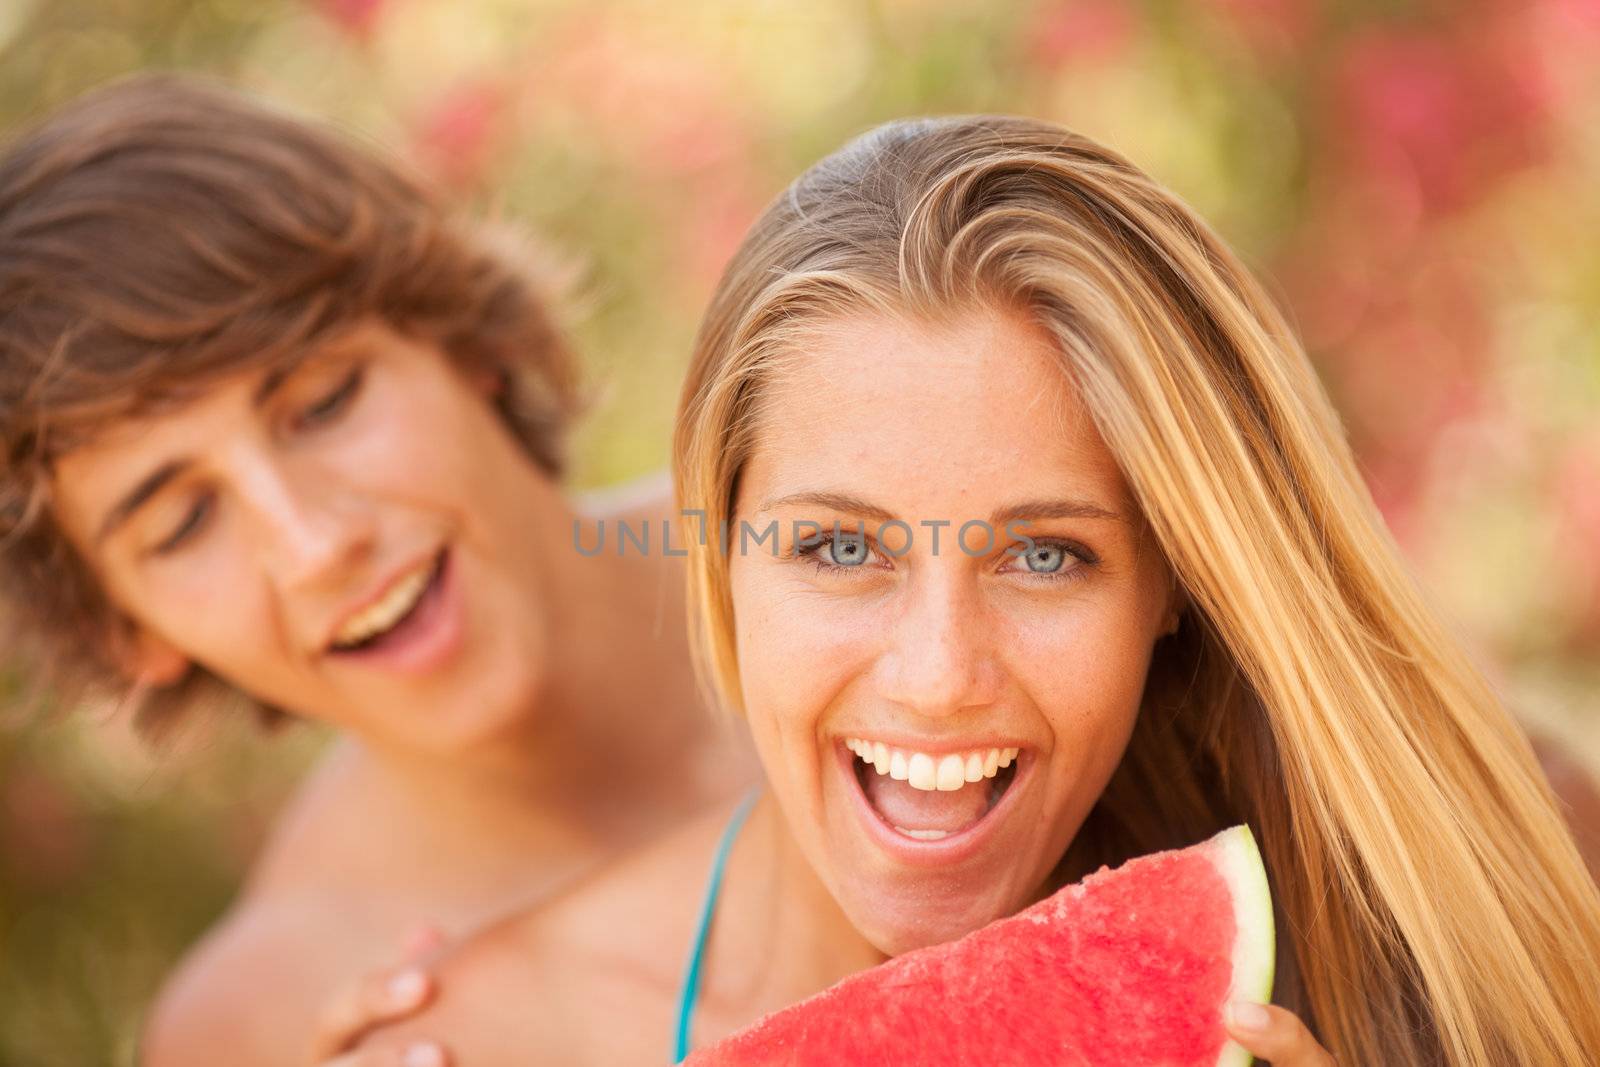 Portrait of a young beautiful couple eating watermelon